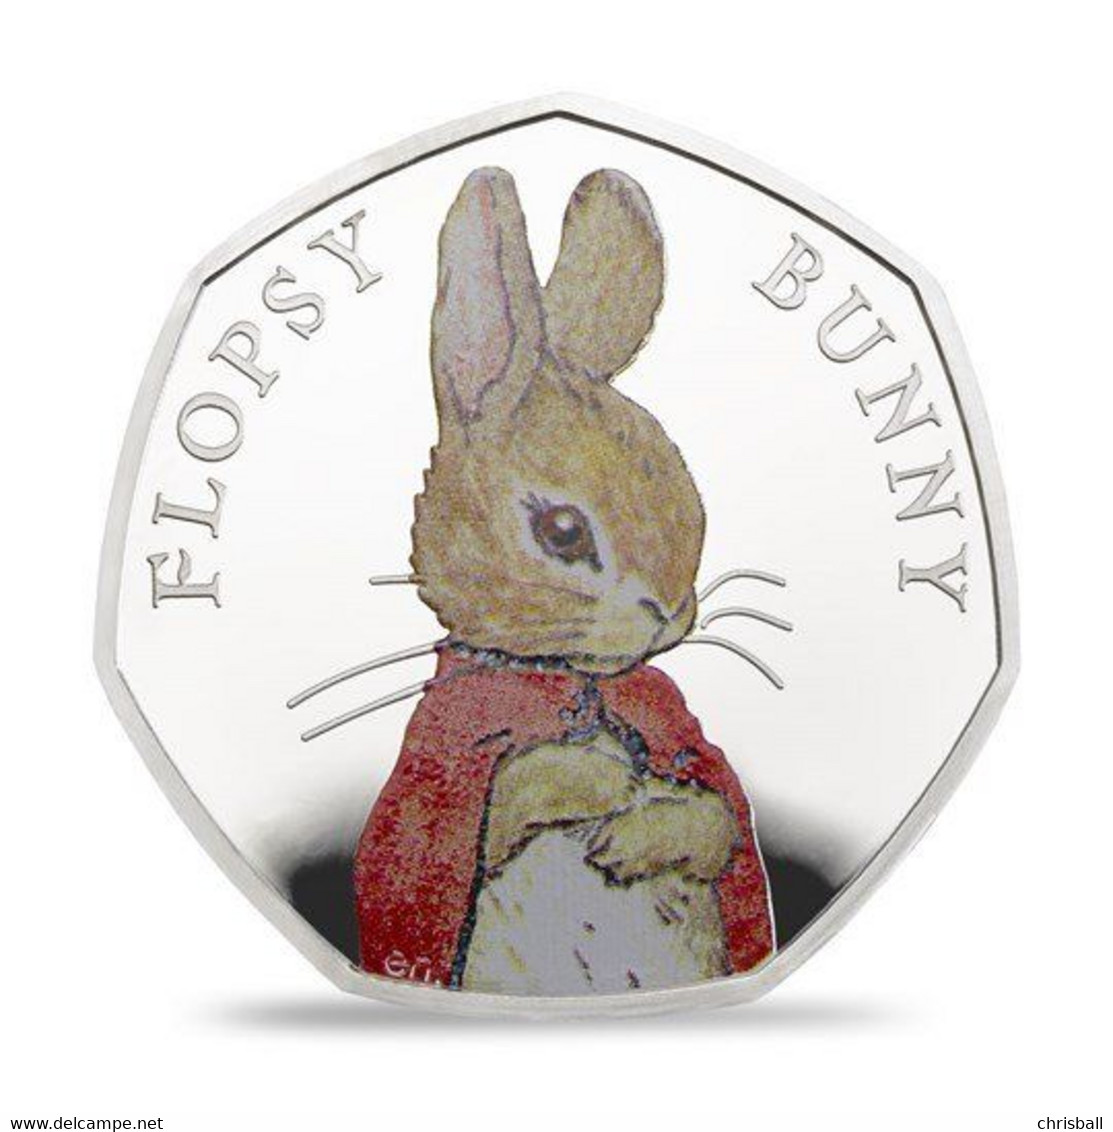 Great Britain UK 2018 Flopsy Bunny 50p Coin - Silver Proof - Mint Sets & Proof Sets